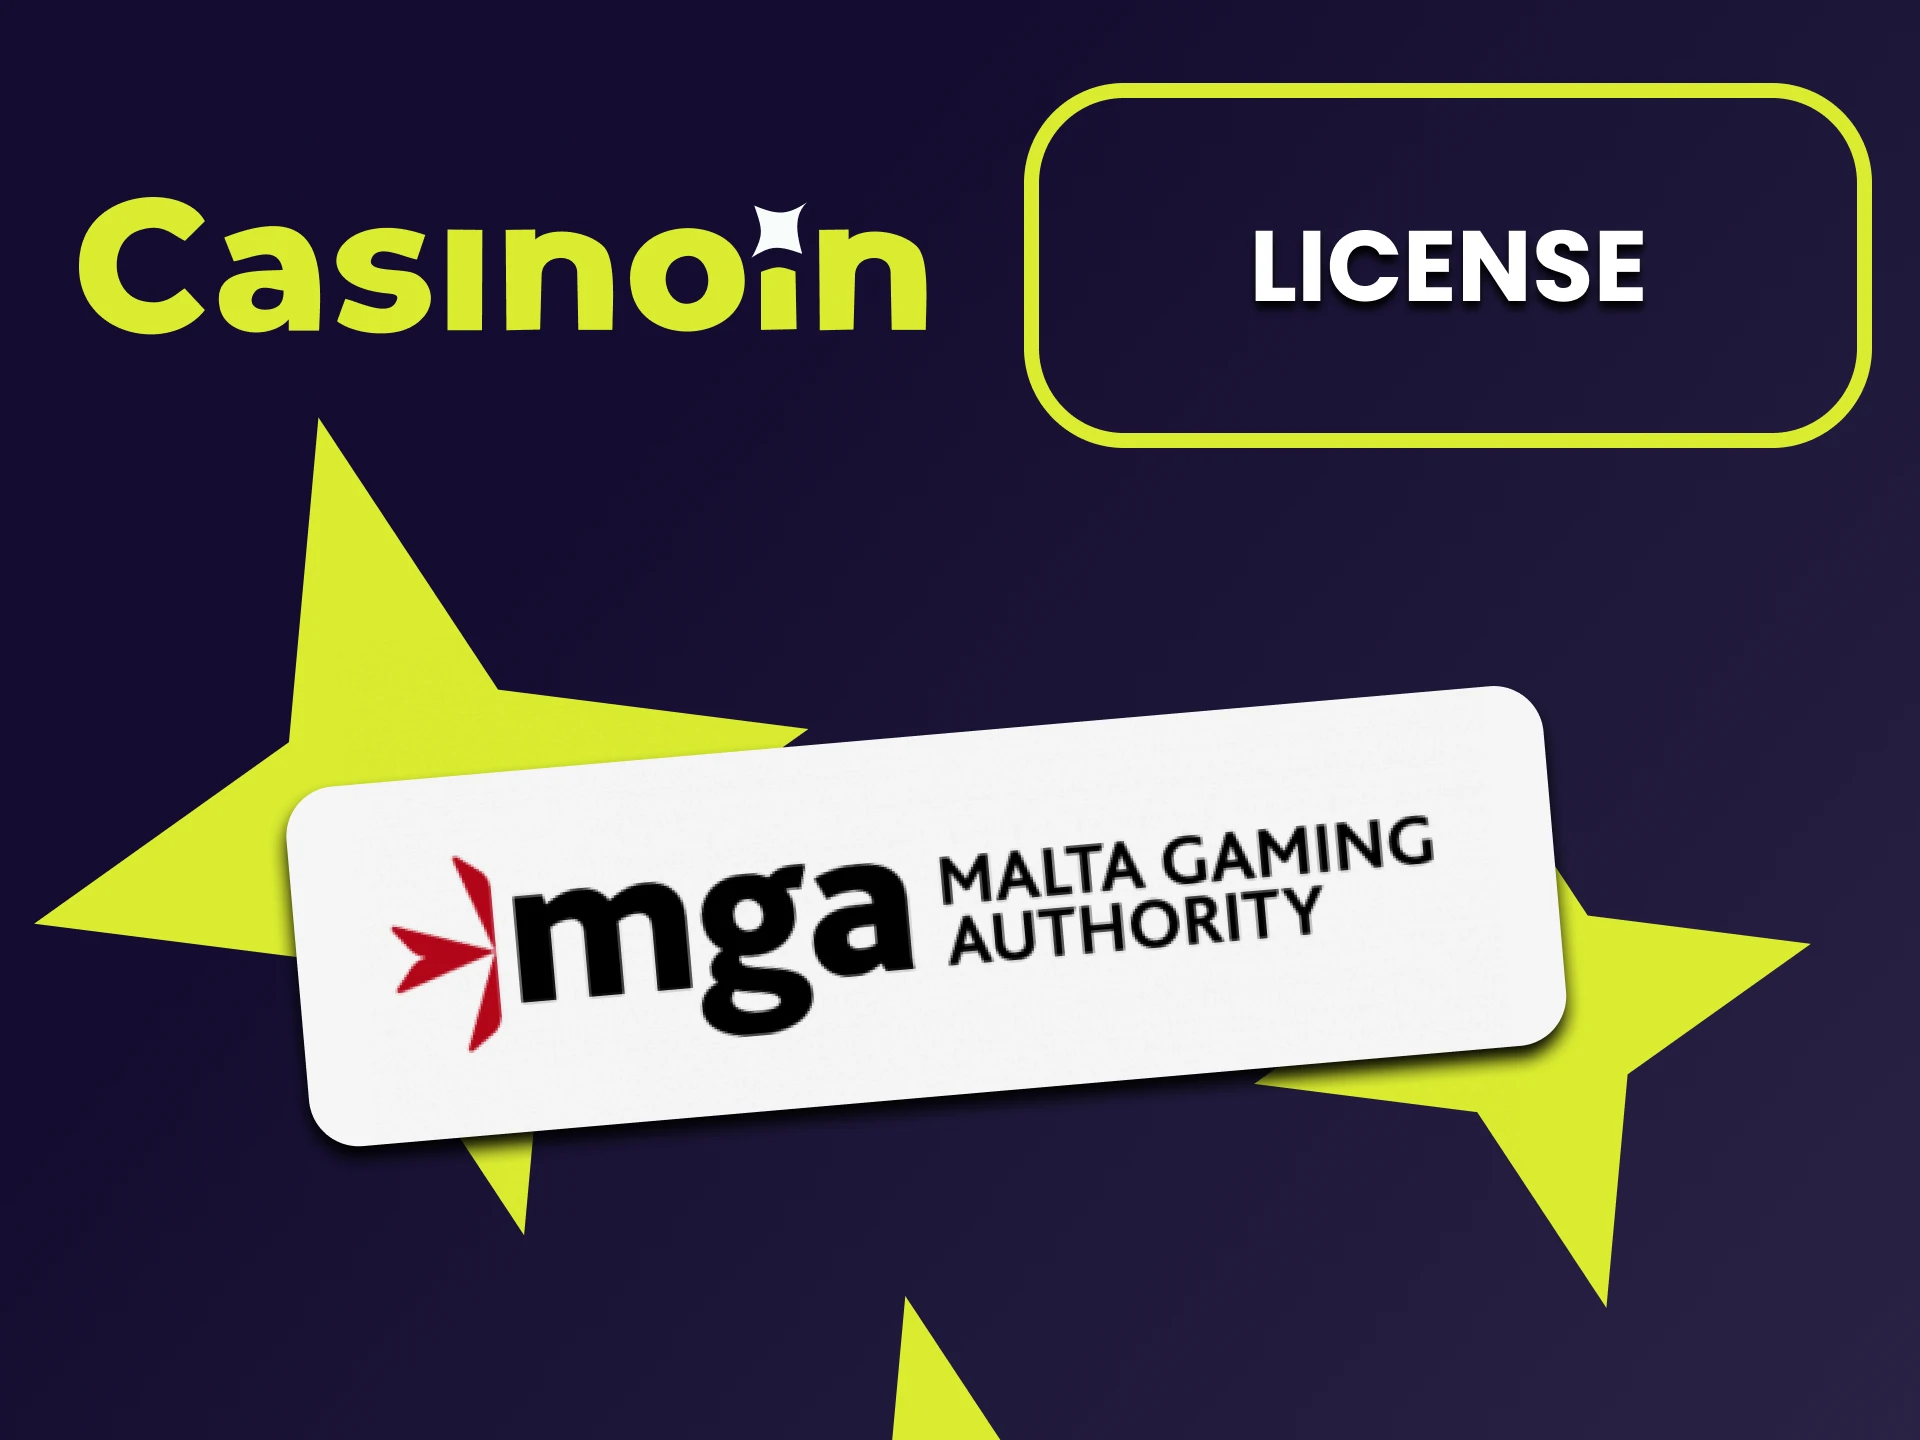 Casinoin is a legal service for betting and gaming.